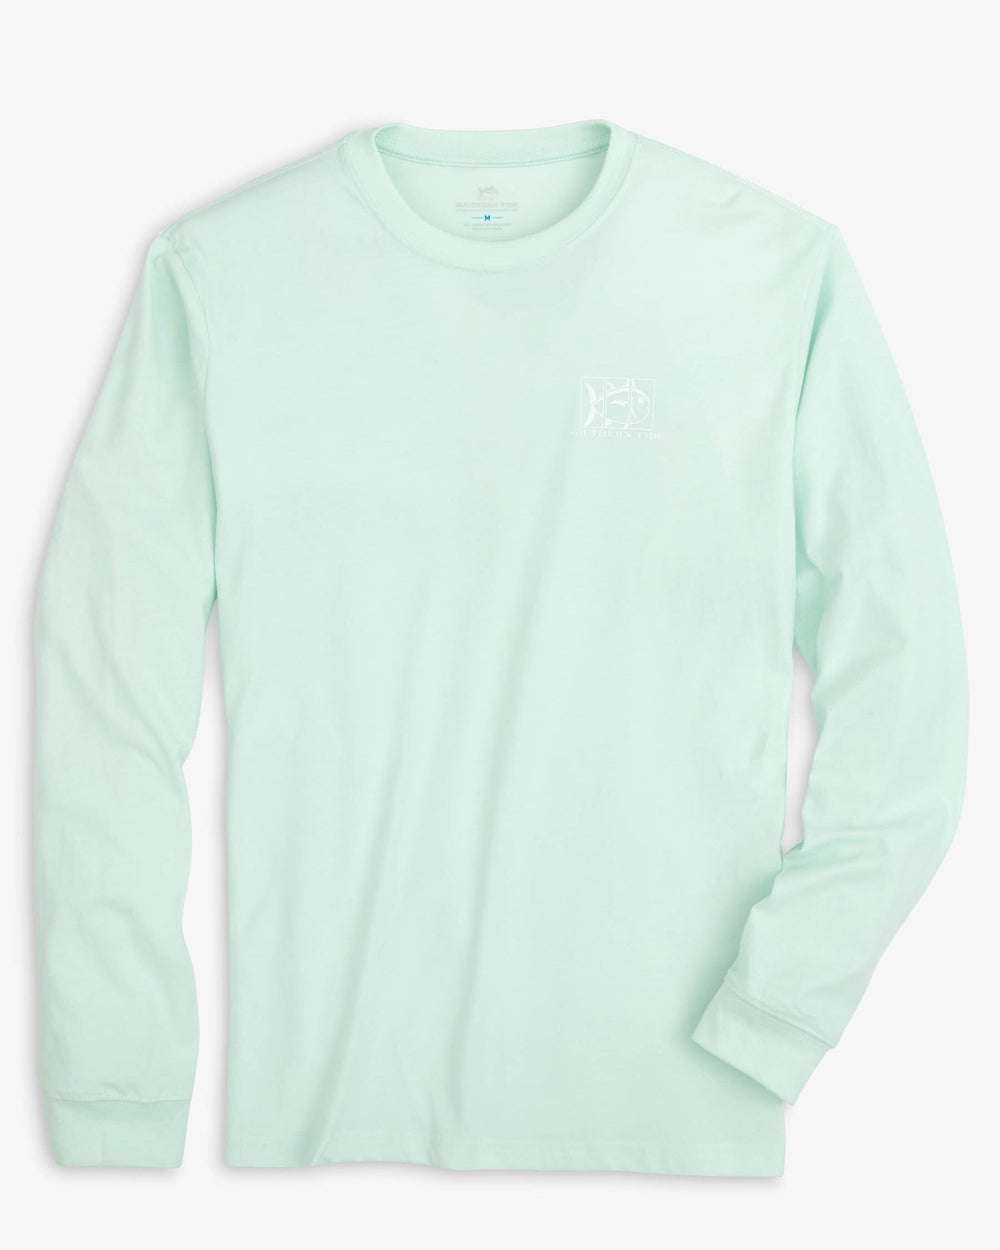 The front view of the Southern Tide Coastal Triptych Long Sleeve T-Shirt by Southern Tide - Turquoise Mist